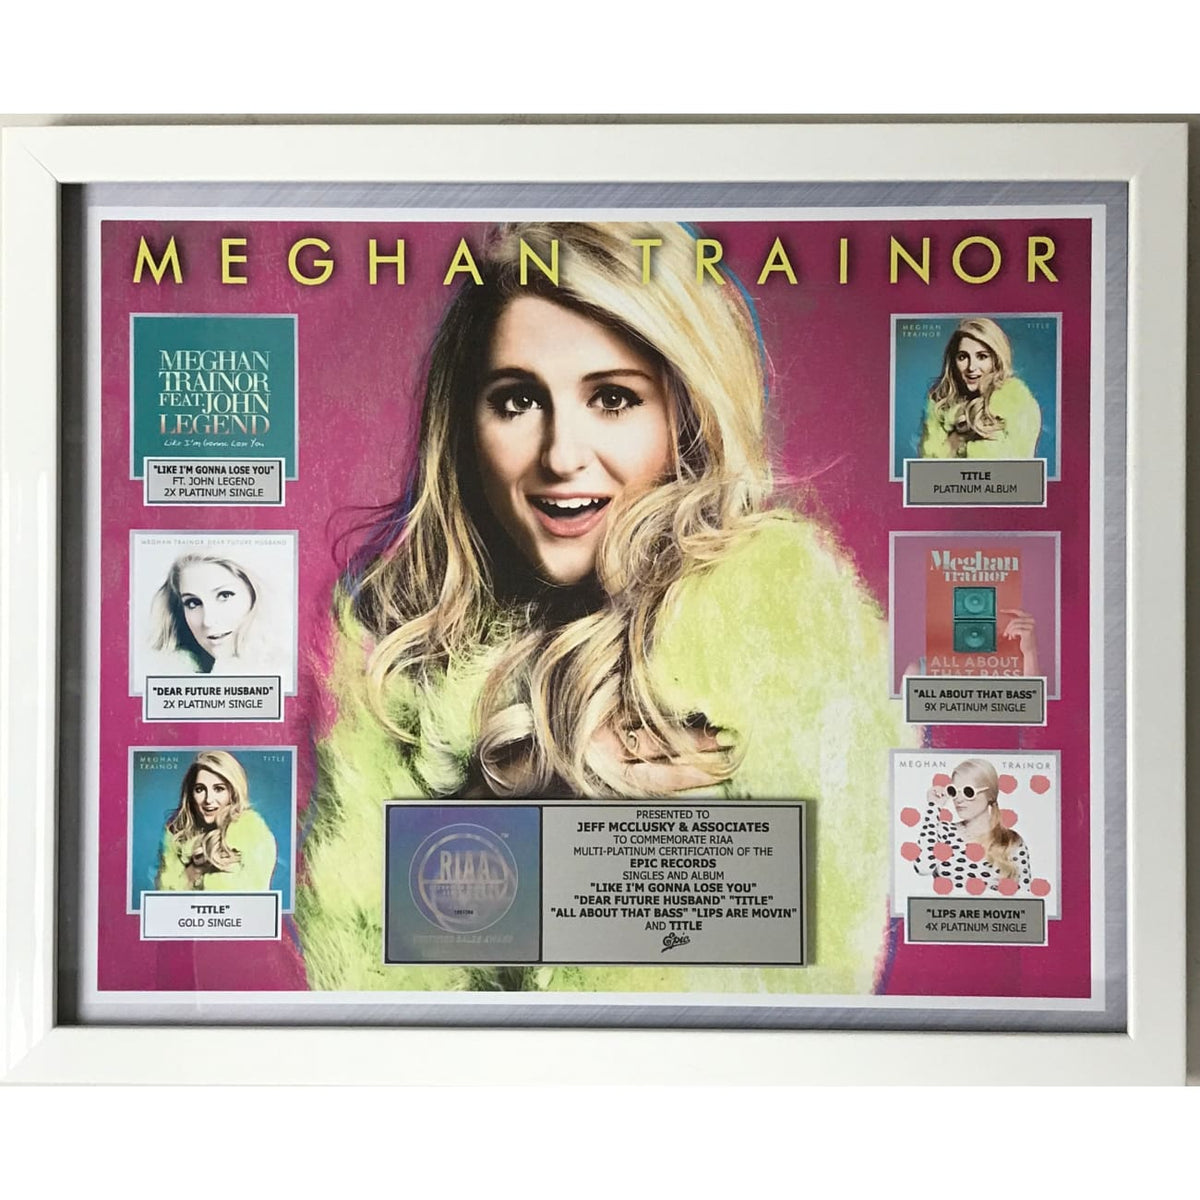 Meghan Trainor Signed Made You Look CD Album Cover Framed 